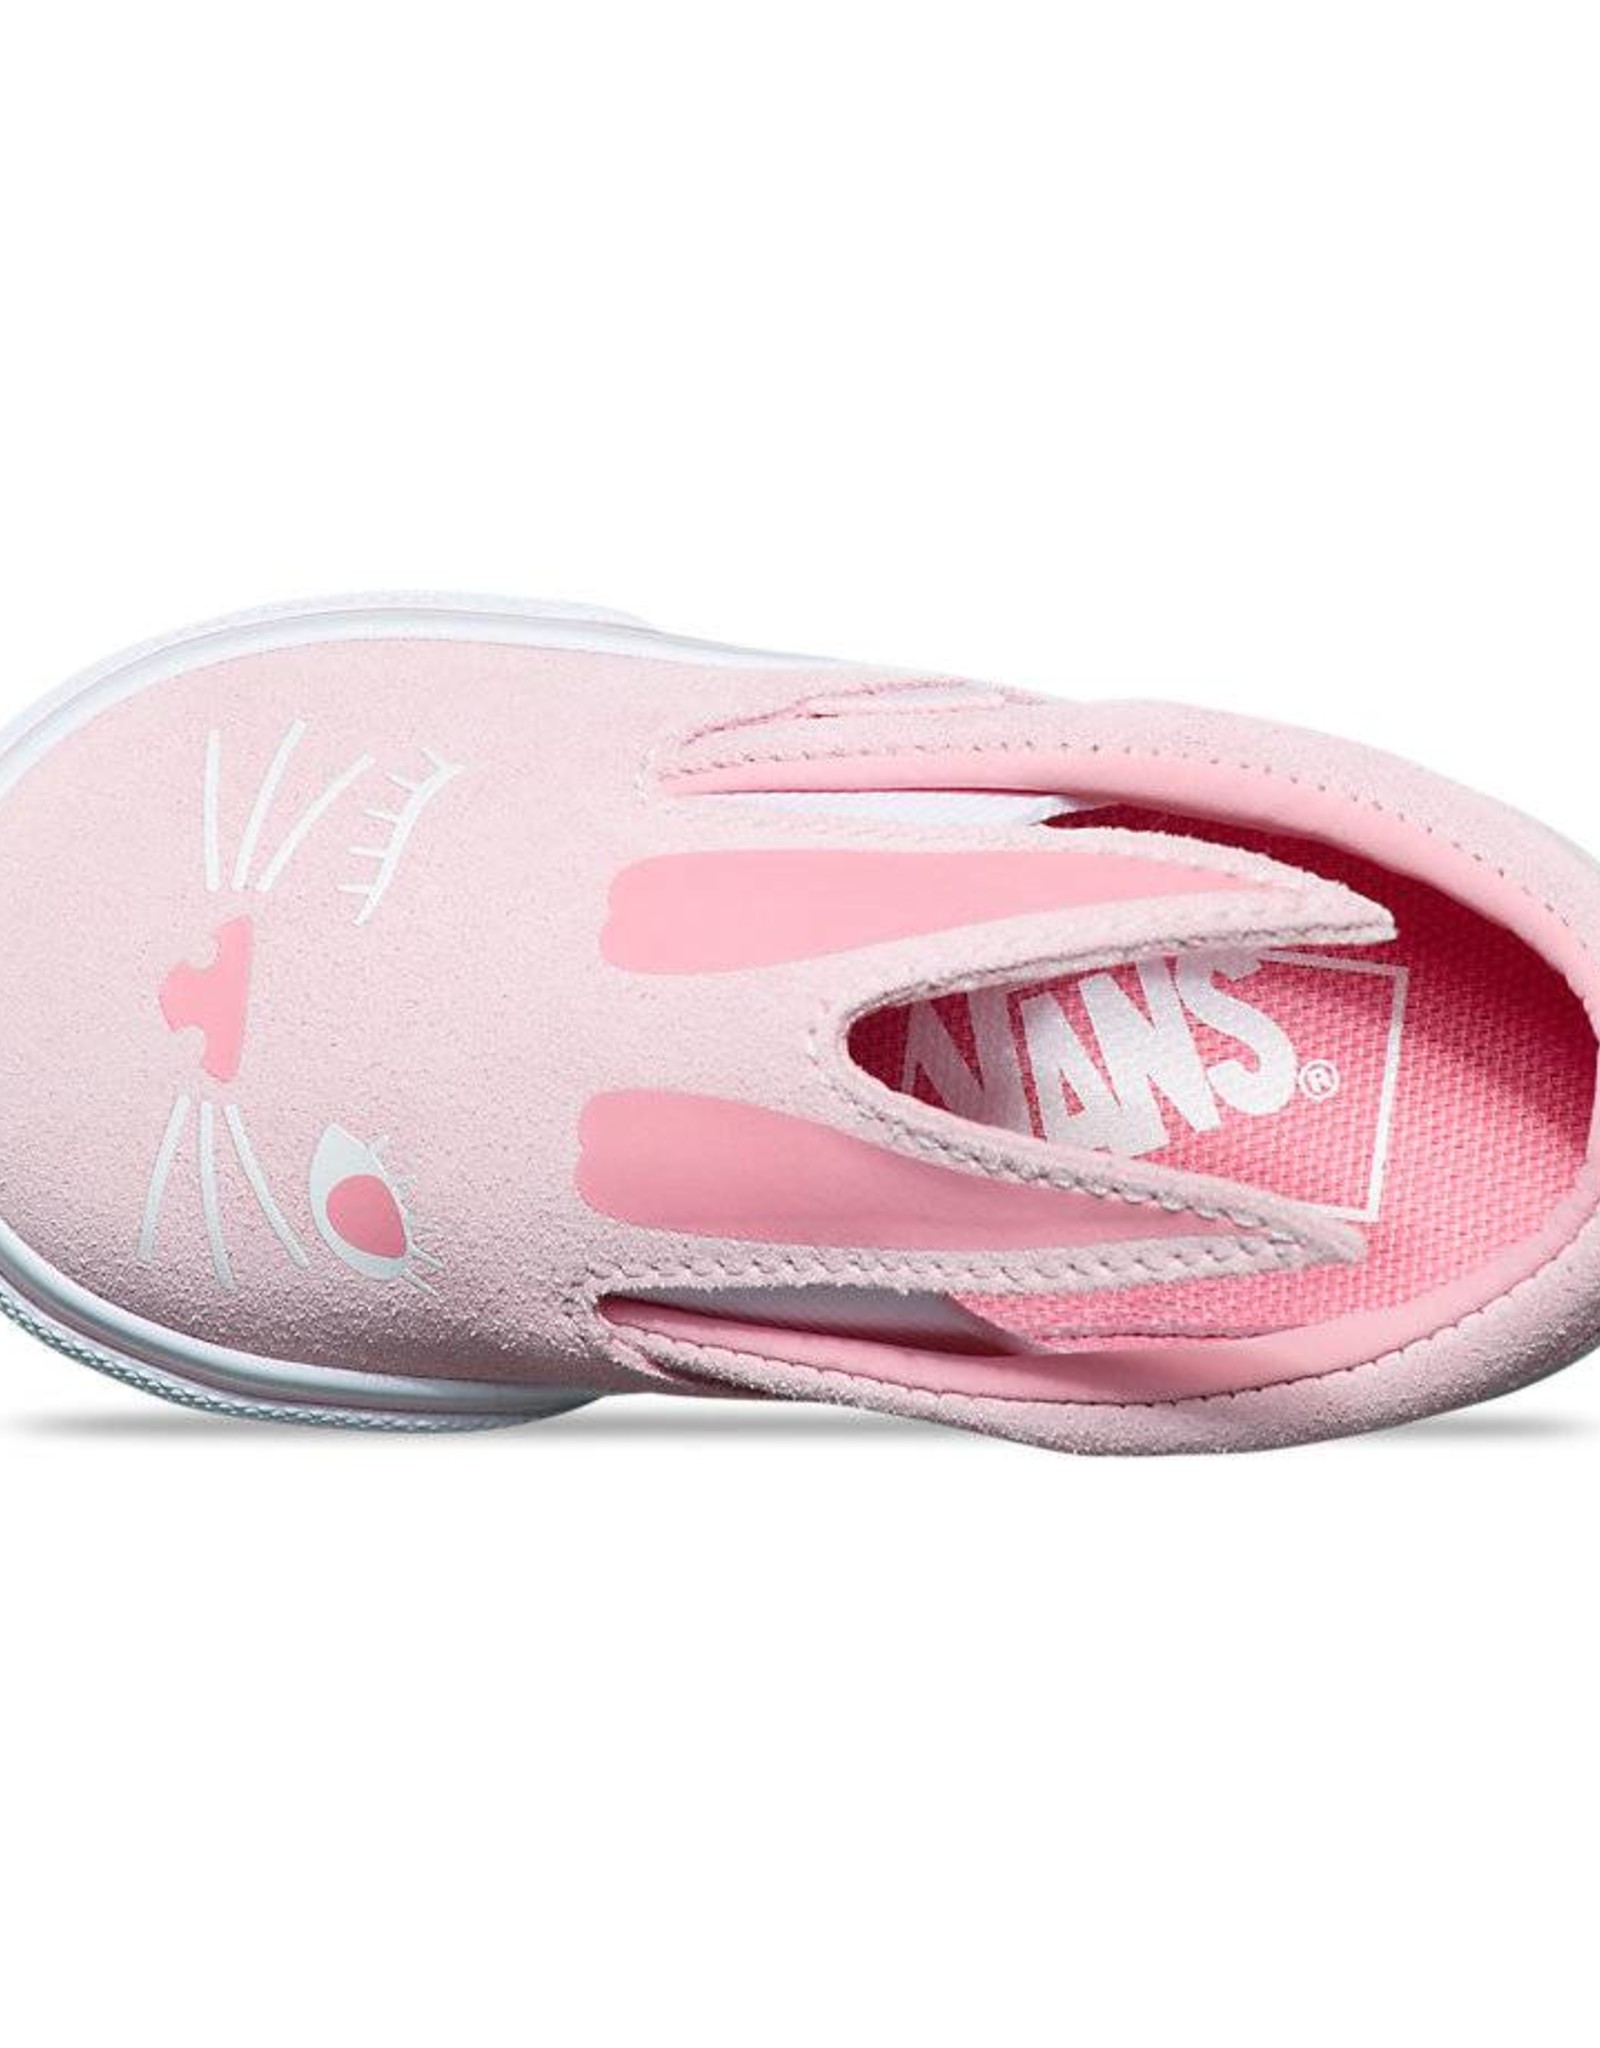 Vans Chaussures Lapin